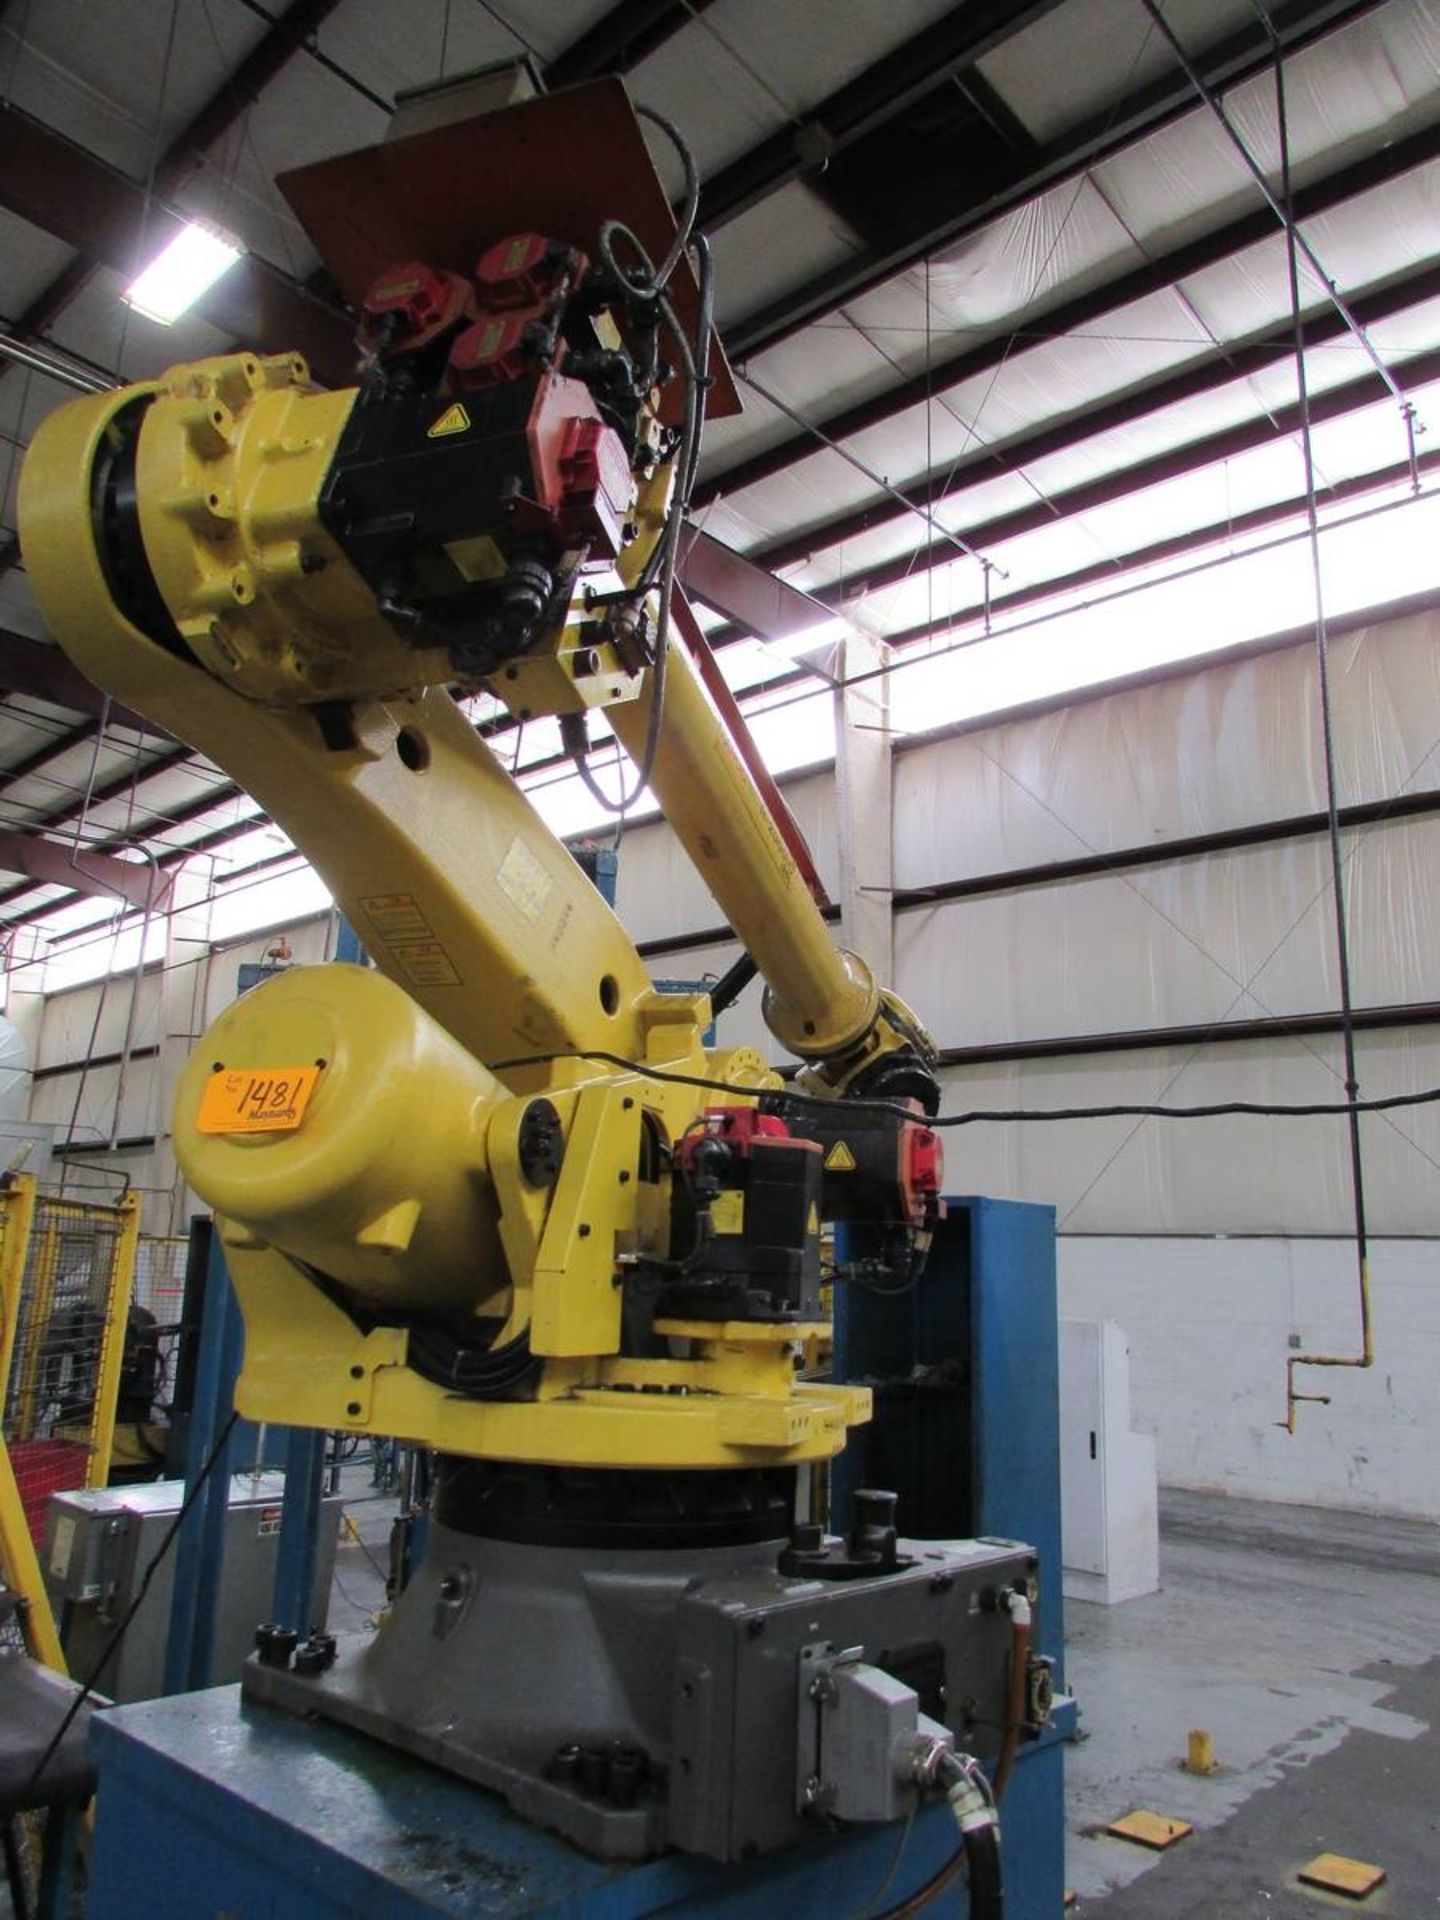 2015 Fanuc R 2000 iC 125L 6 Axis Material Handling Robot - Image 6 of 11